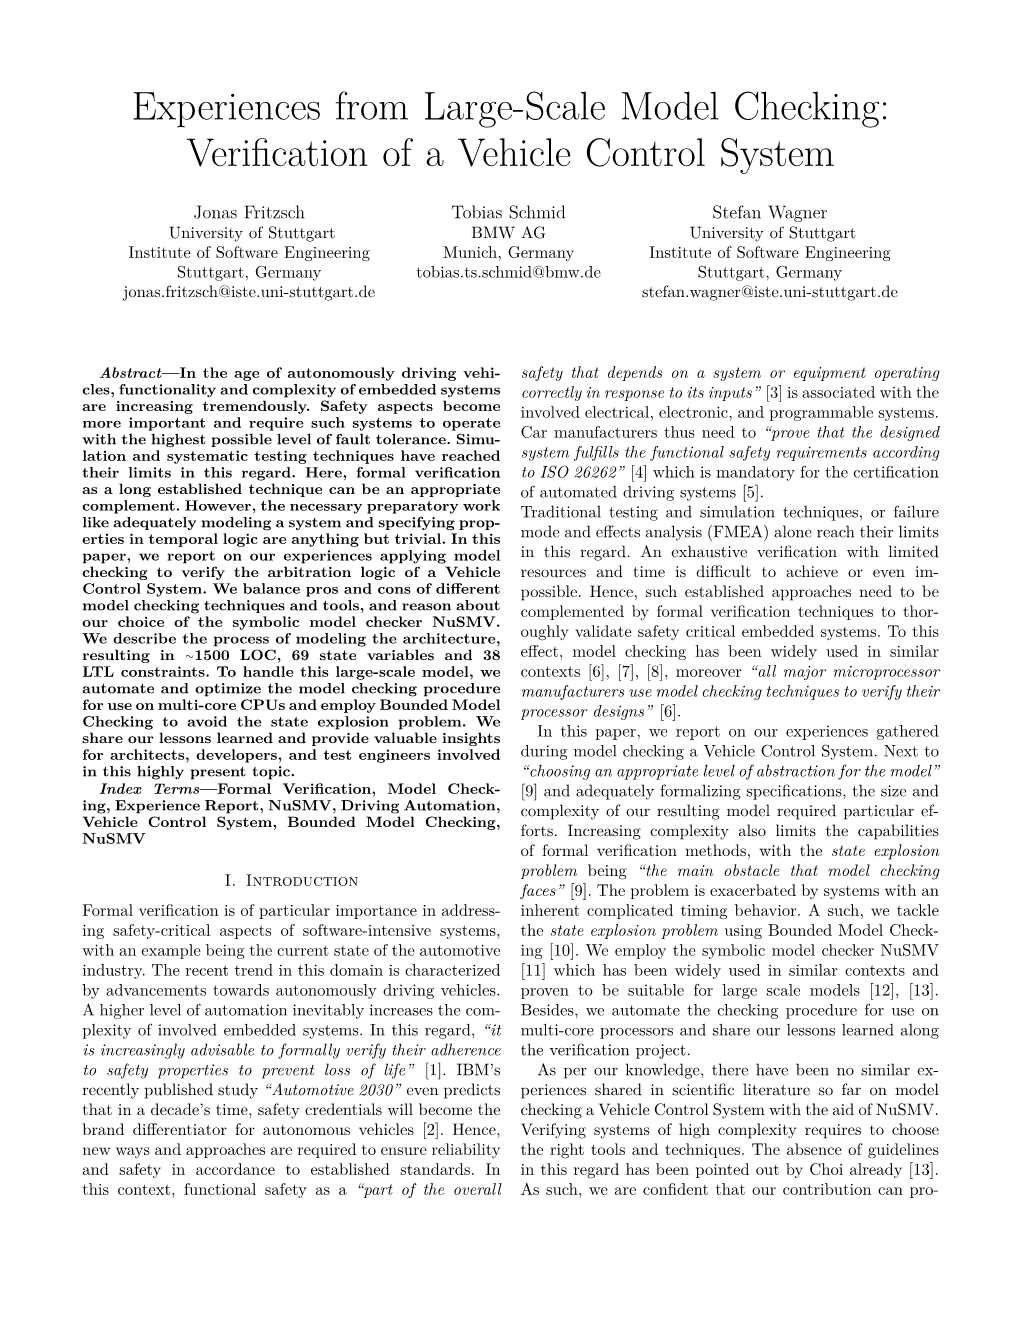 Experiences from Large-Scale Model Checking: Veriﬁcation of a Vehicle Control System